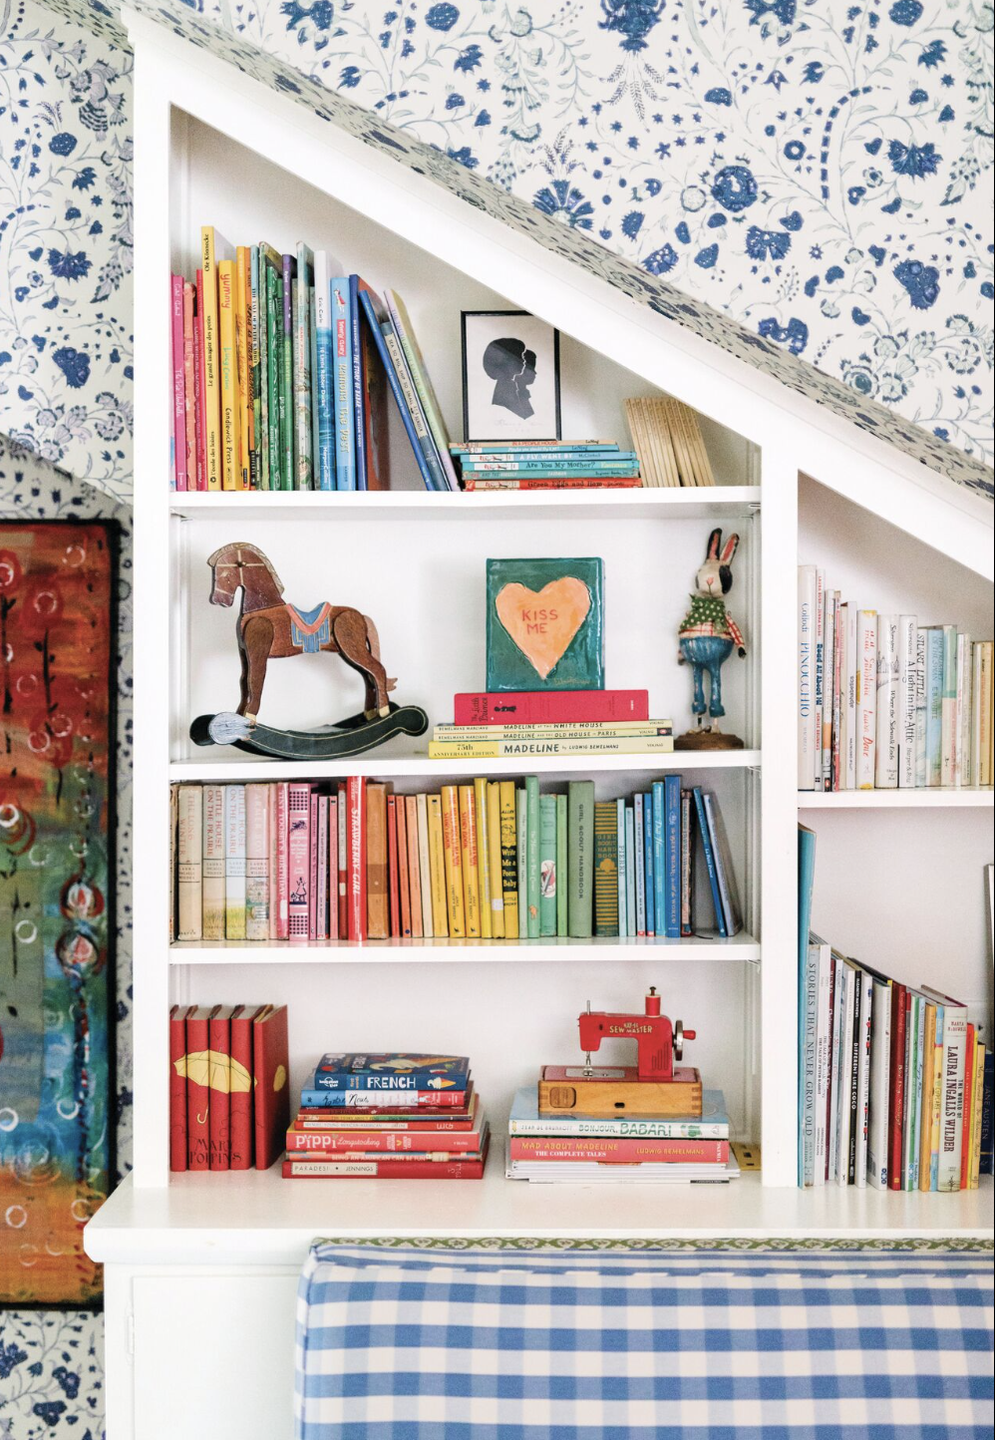 colorful bookshelves stocked with vintage vintage books